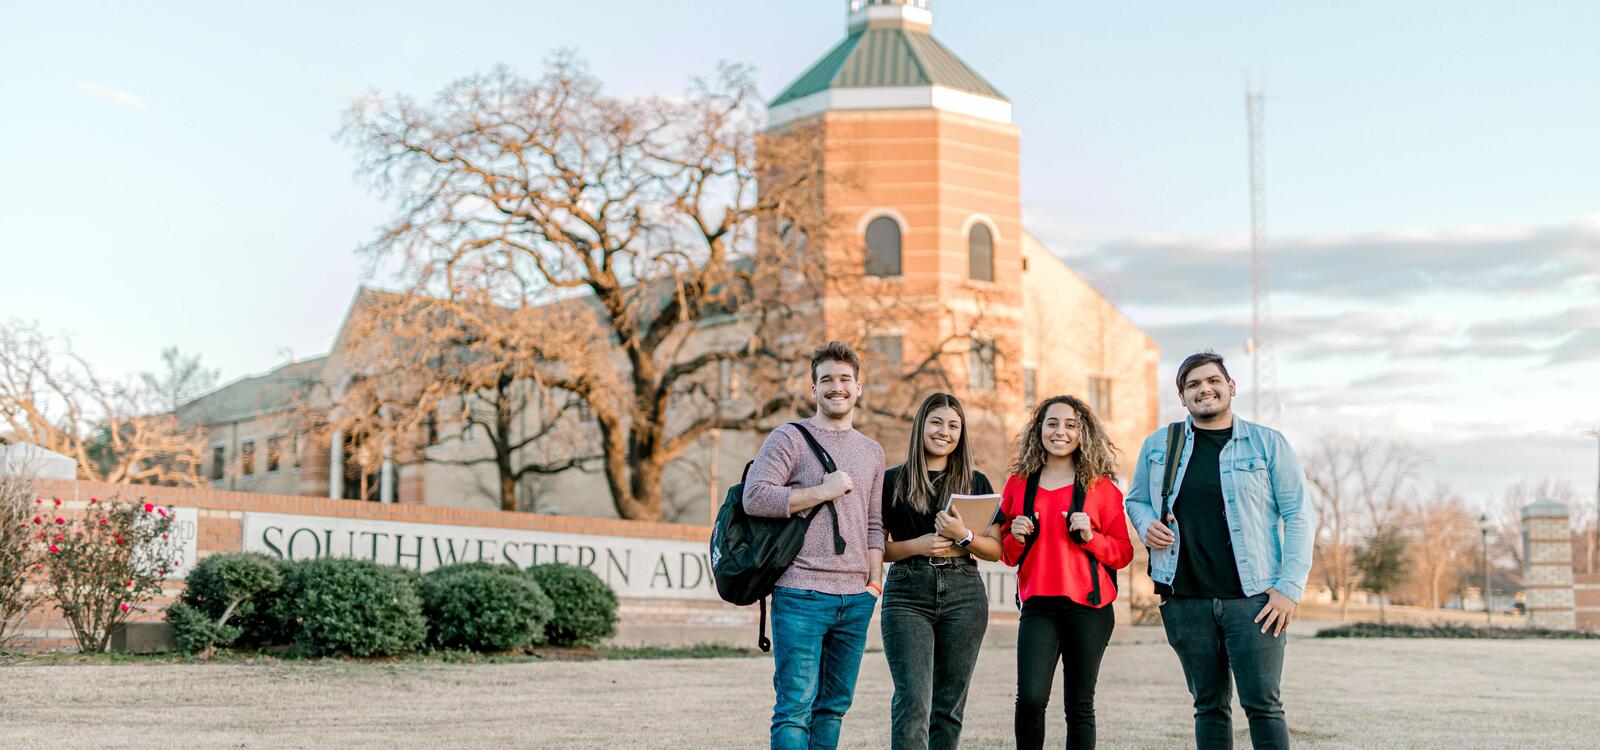 Four students, with backpacks, smile together as they stand in front of a bricked sign that reads " Southwestern Adventist University" 